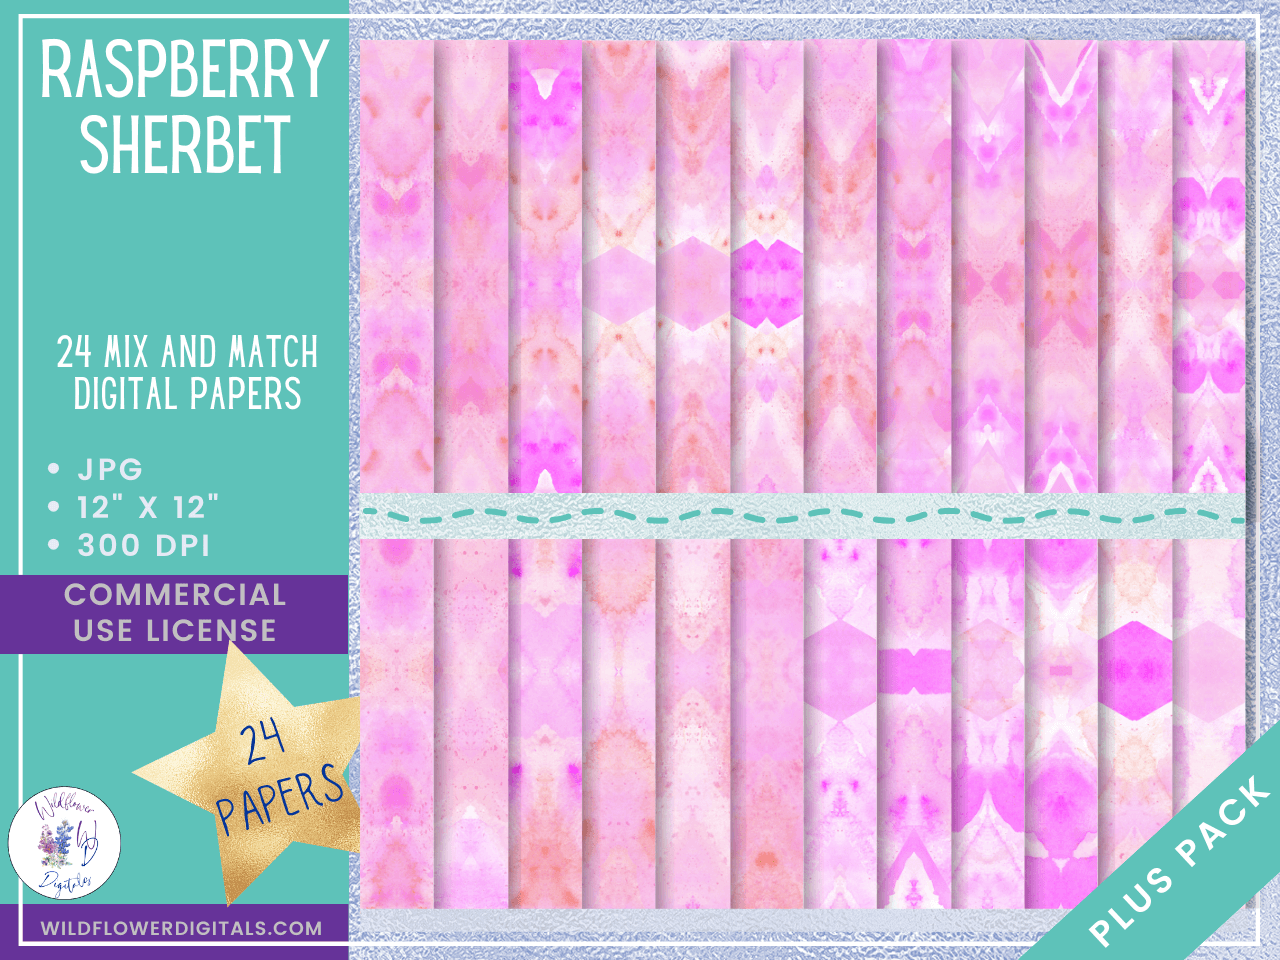 mockup of raspberry sherbet digital papers mix and match papers